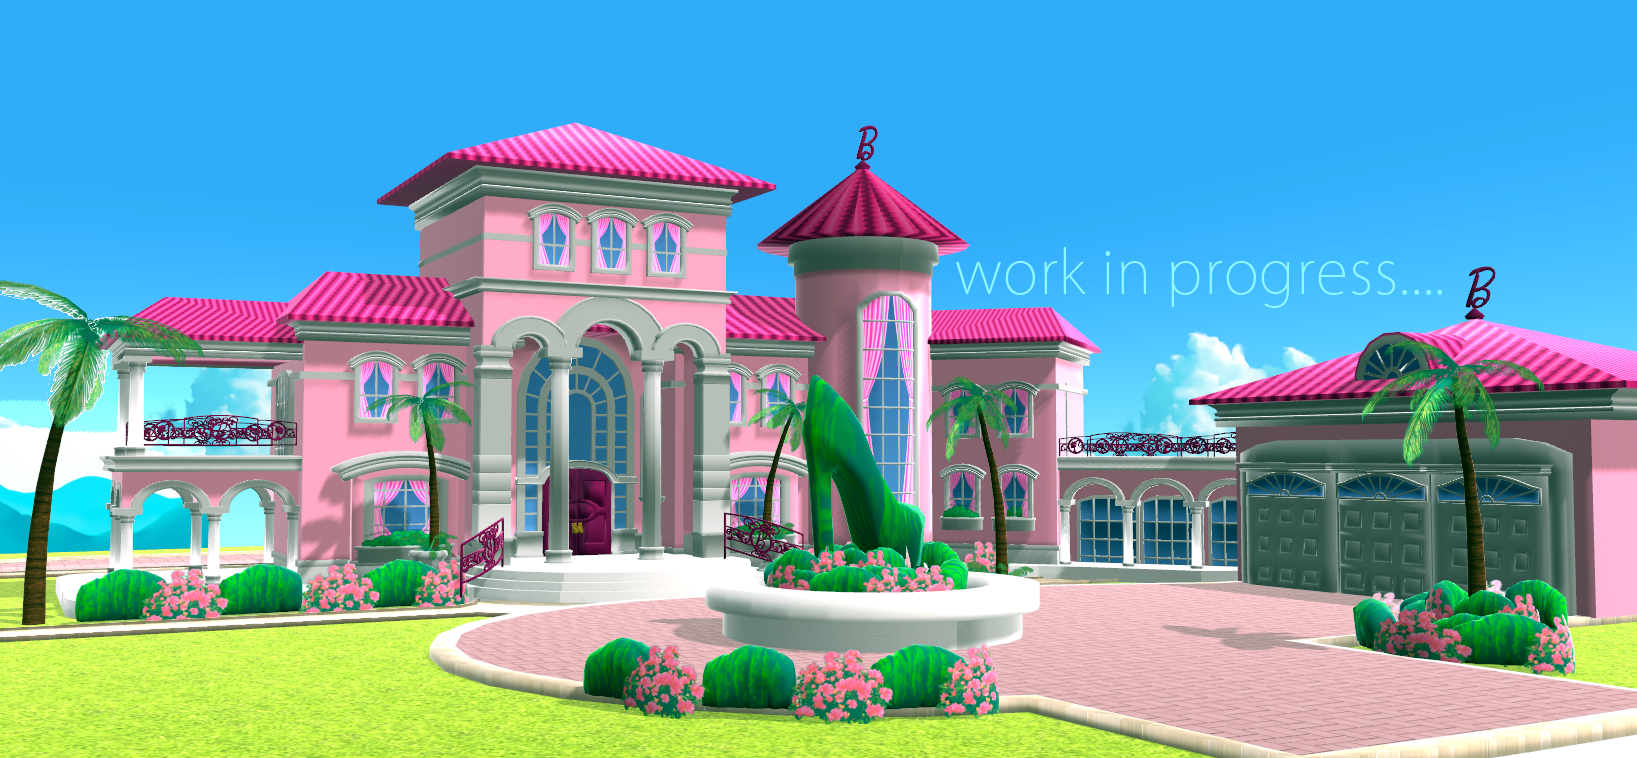 Barbie Dream House Wip 2 By Chatterhead D81nyk2 